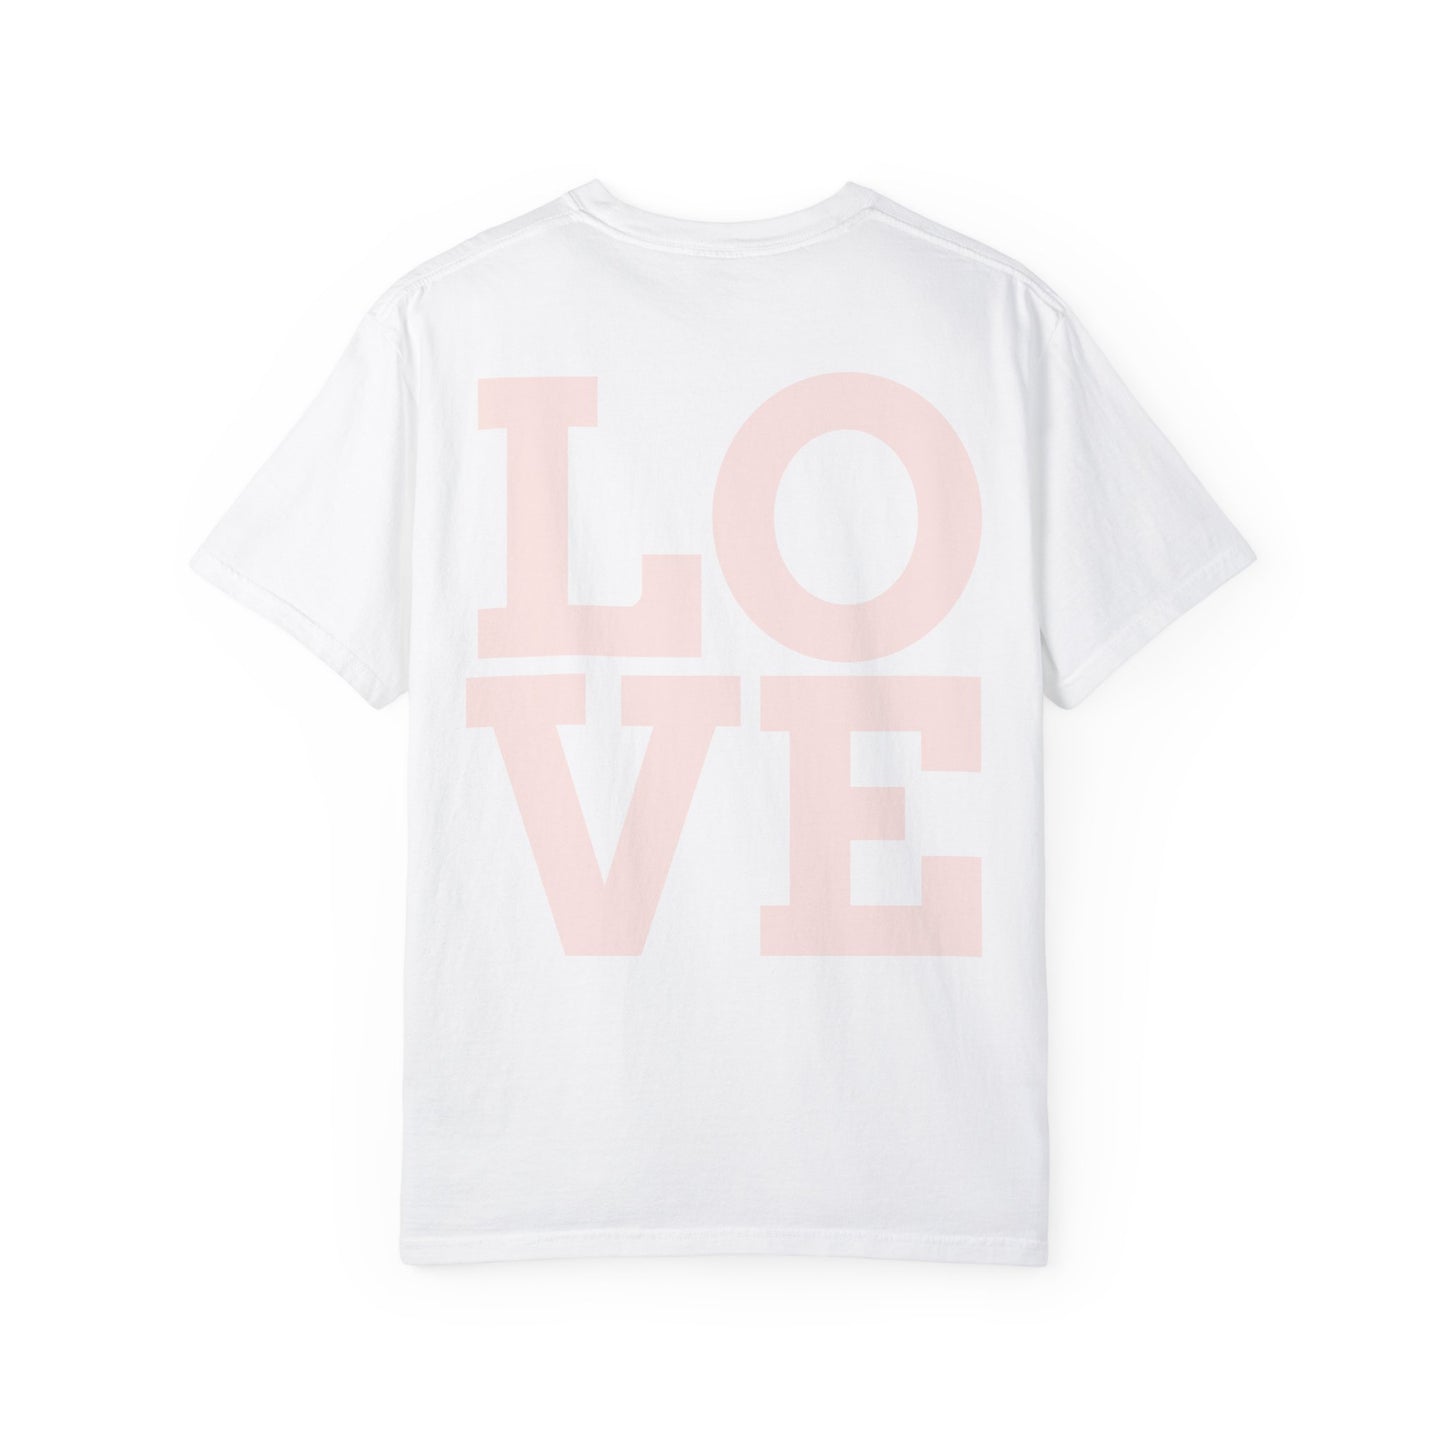 LOVE Graphic T-Shirt - Comfort Colors 1717, 100% Ring-Spun Cotton, Relaxed Fit